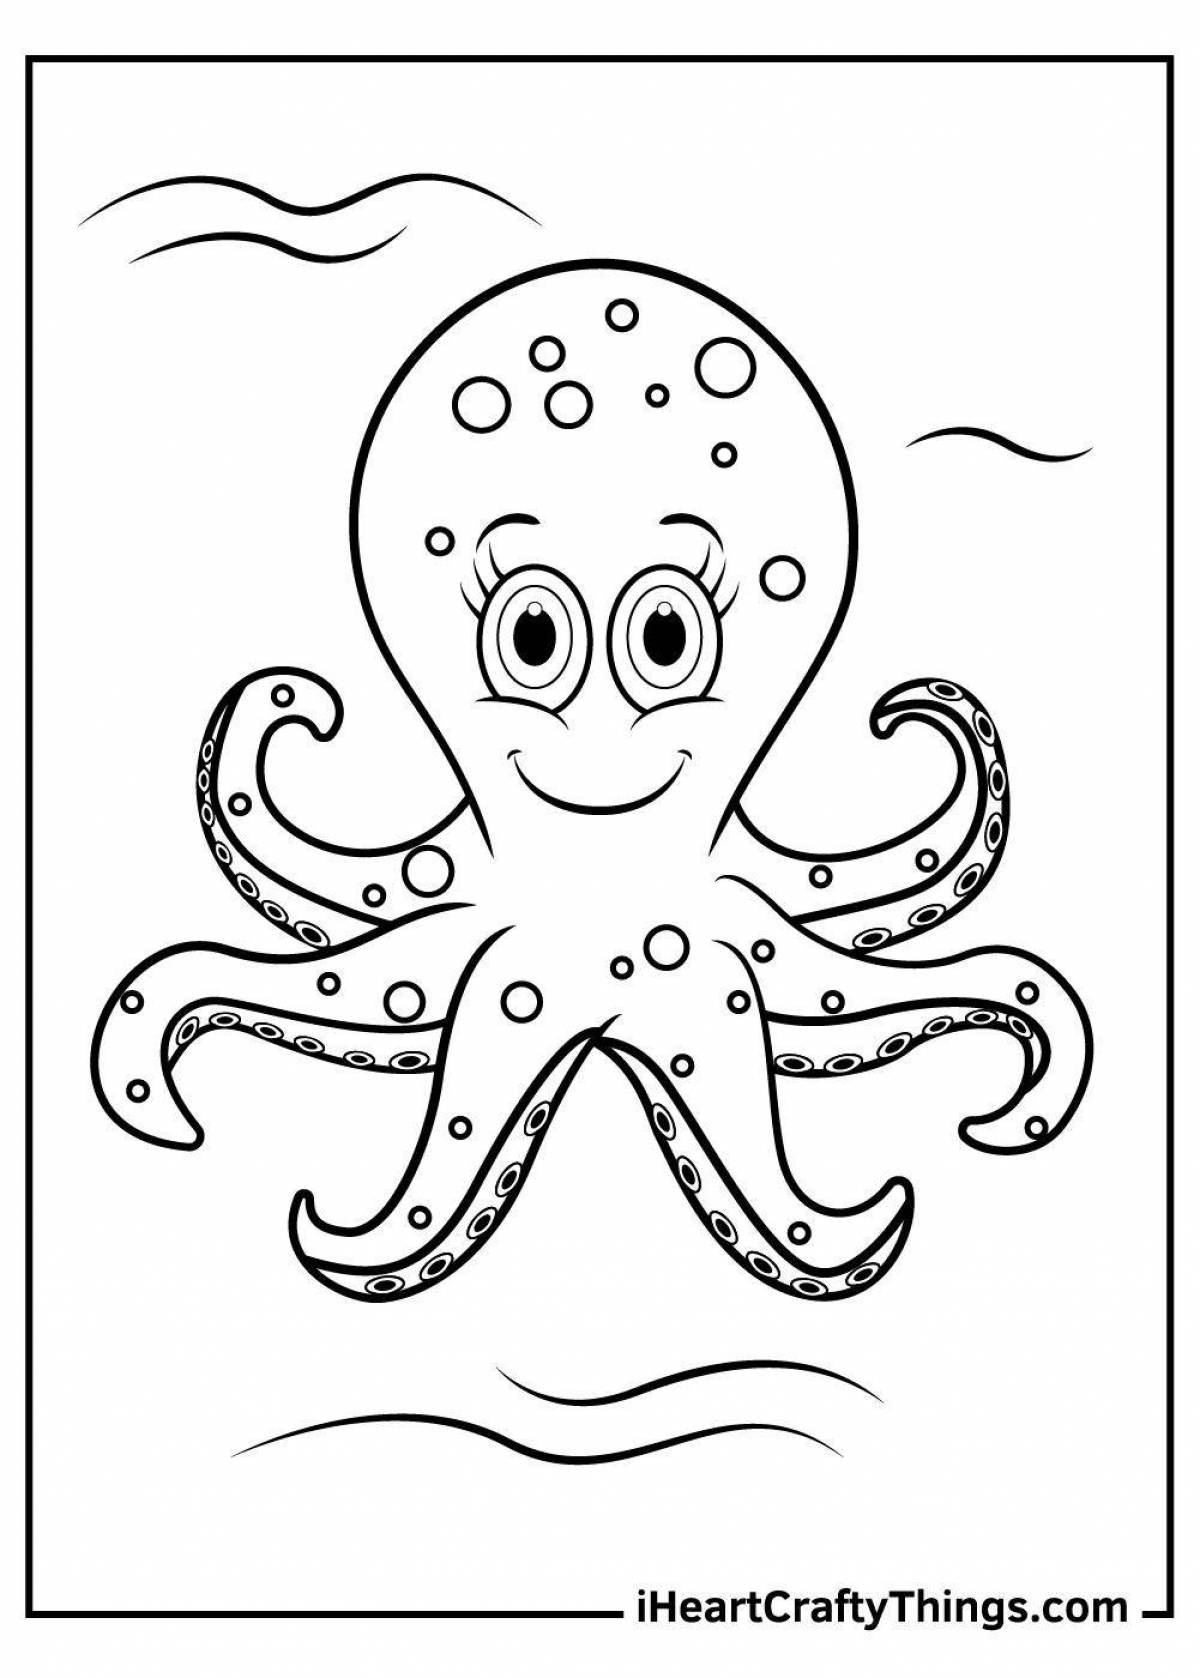 Coloring octopus for kids